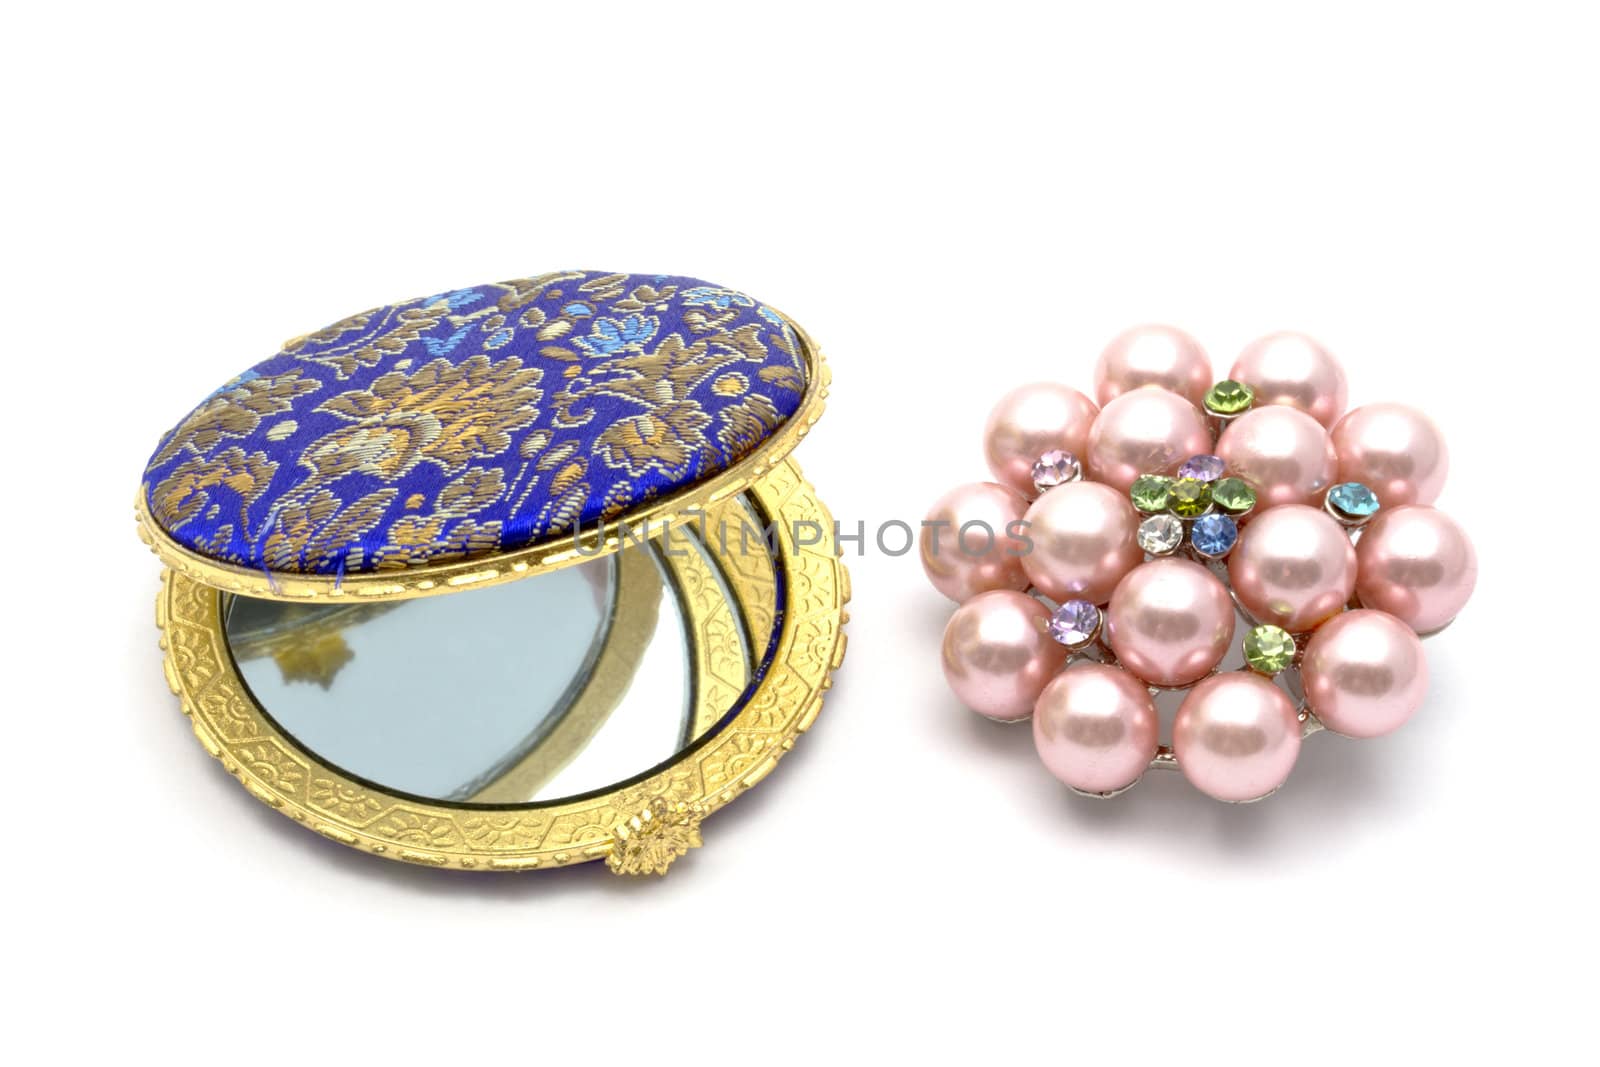  cosmetic mirror and brooch by ibphoto